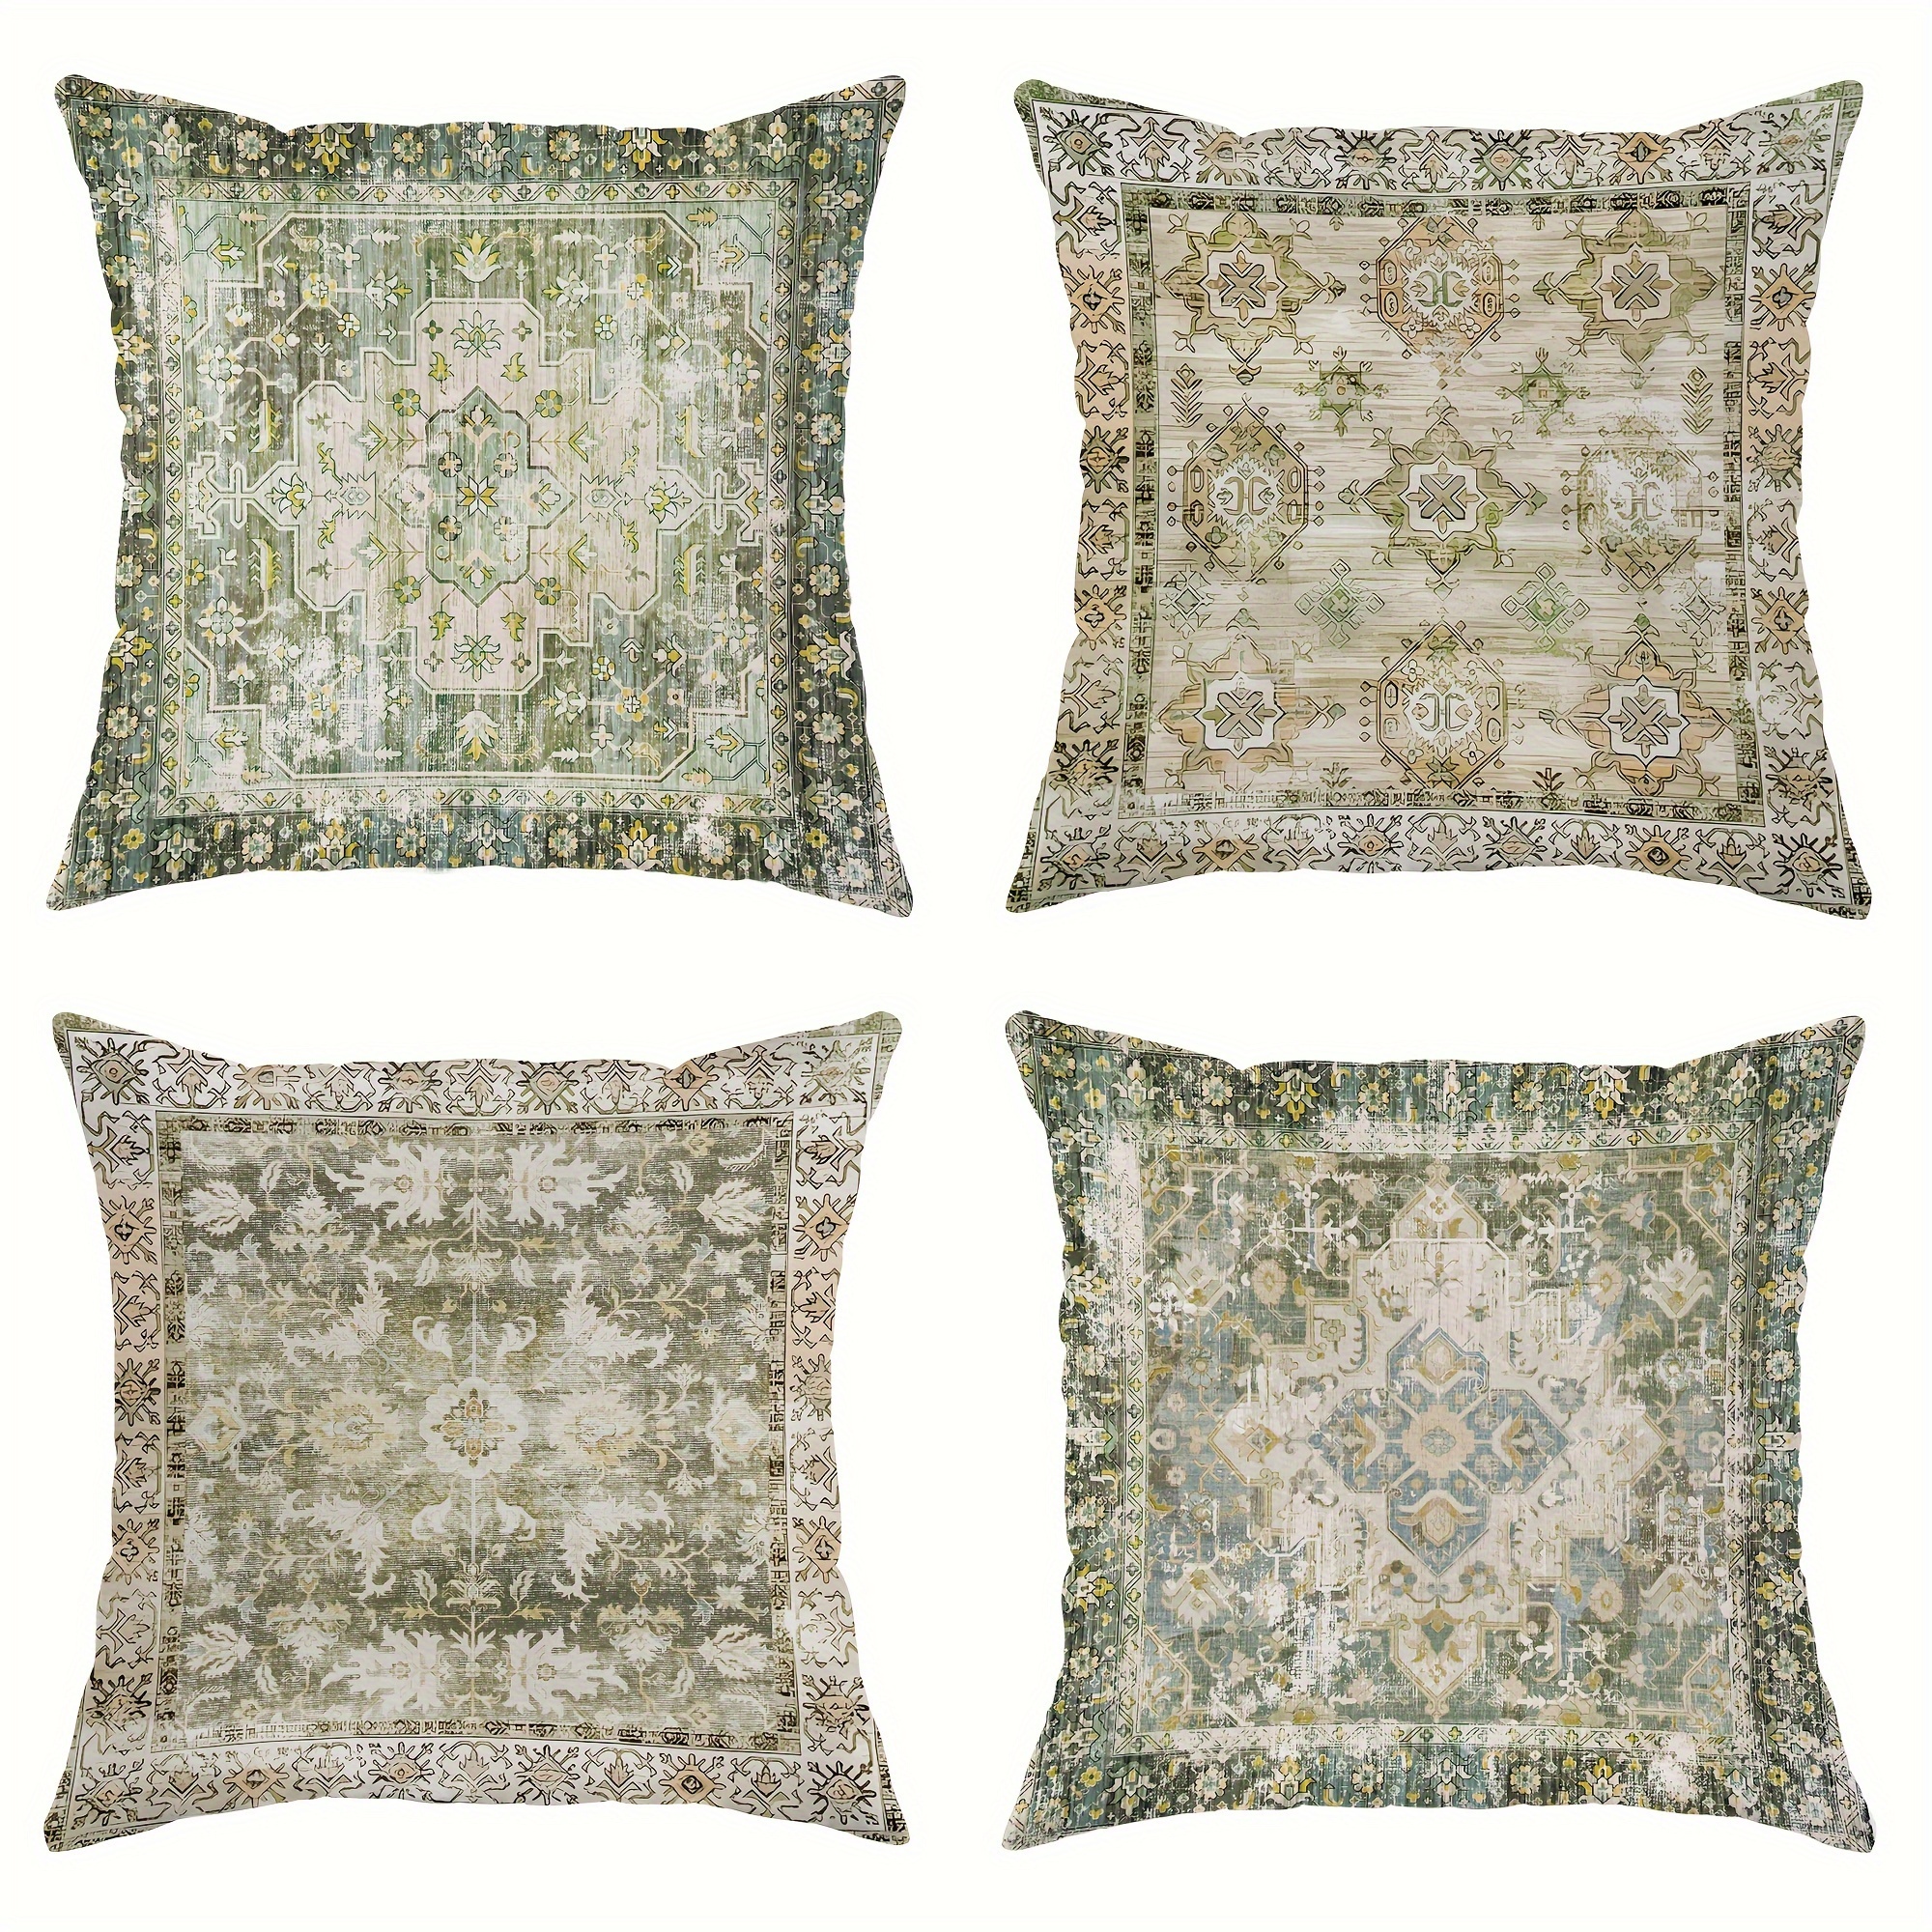 

4pcs Set Bohemian Velvet Throw Pillow Covers - 18x18 Inches, Green Moroccan & Turkish Designs, Zip Closure, Machine Washable For Living Room And Bedroom Decor Decorative Pillows Pillows Decorative